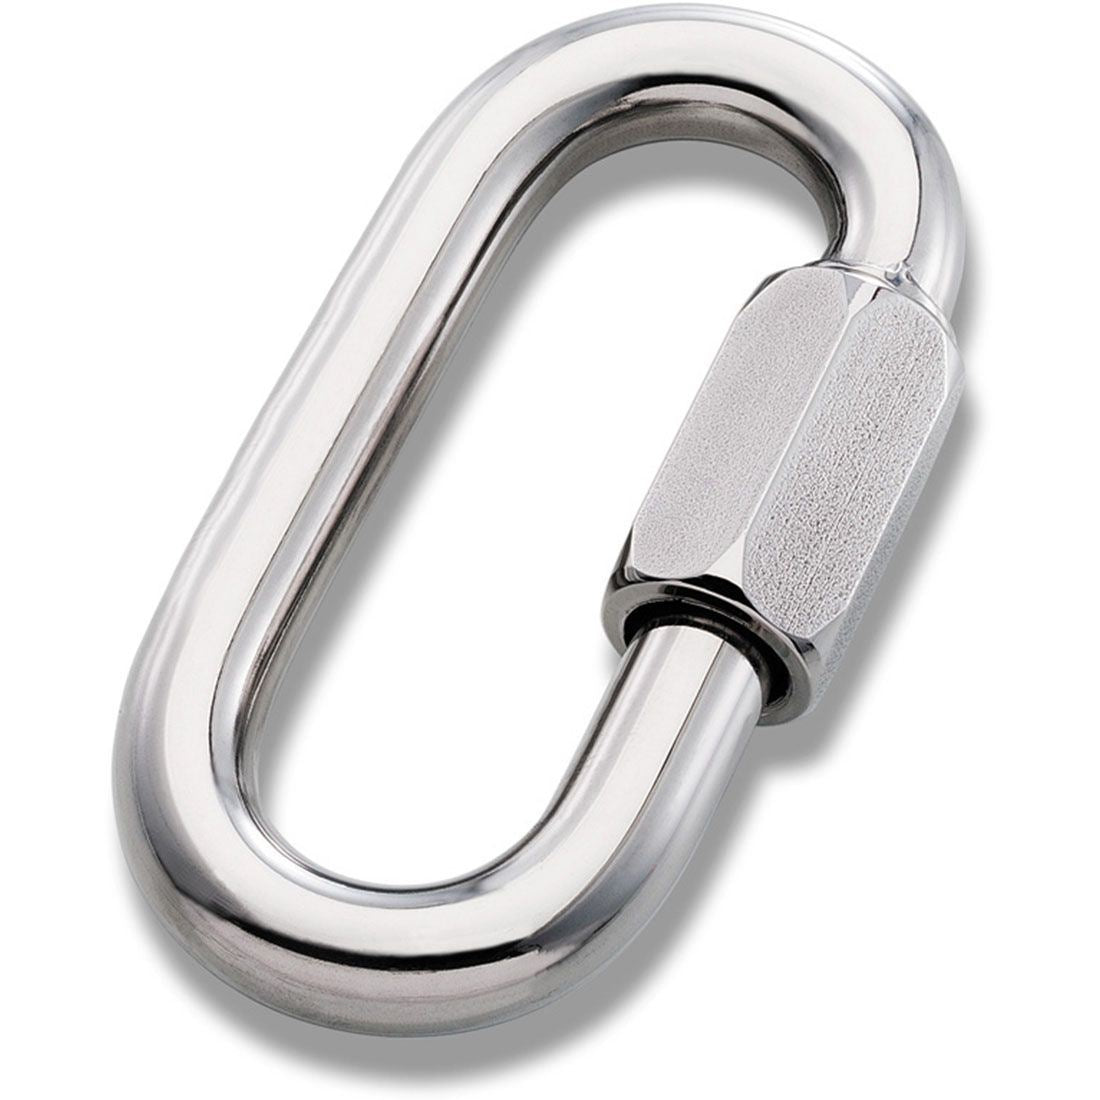 10 Pc. Zinc Plated Straight Oval Spring Snap Hook Carabiner 3/16